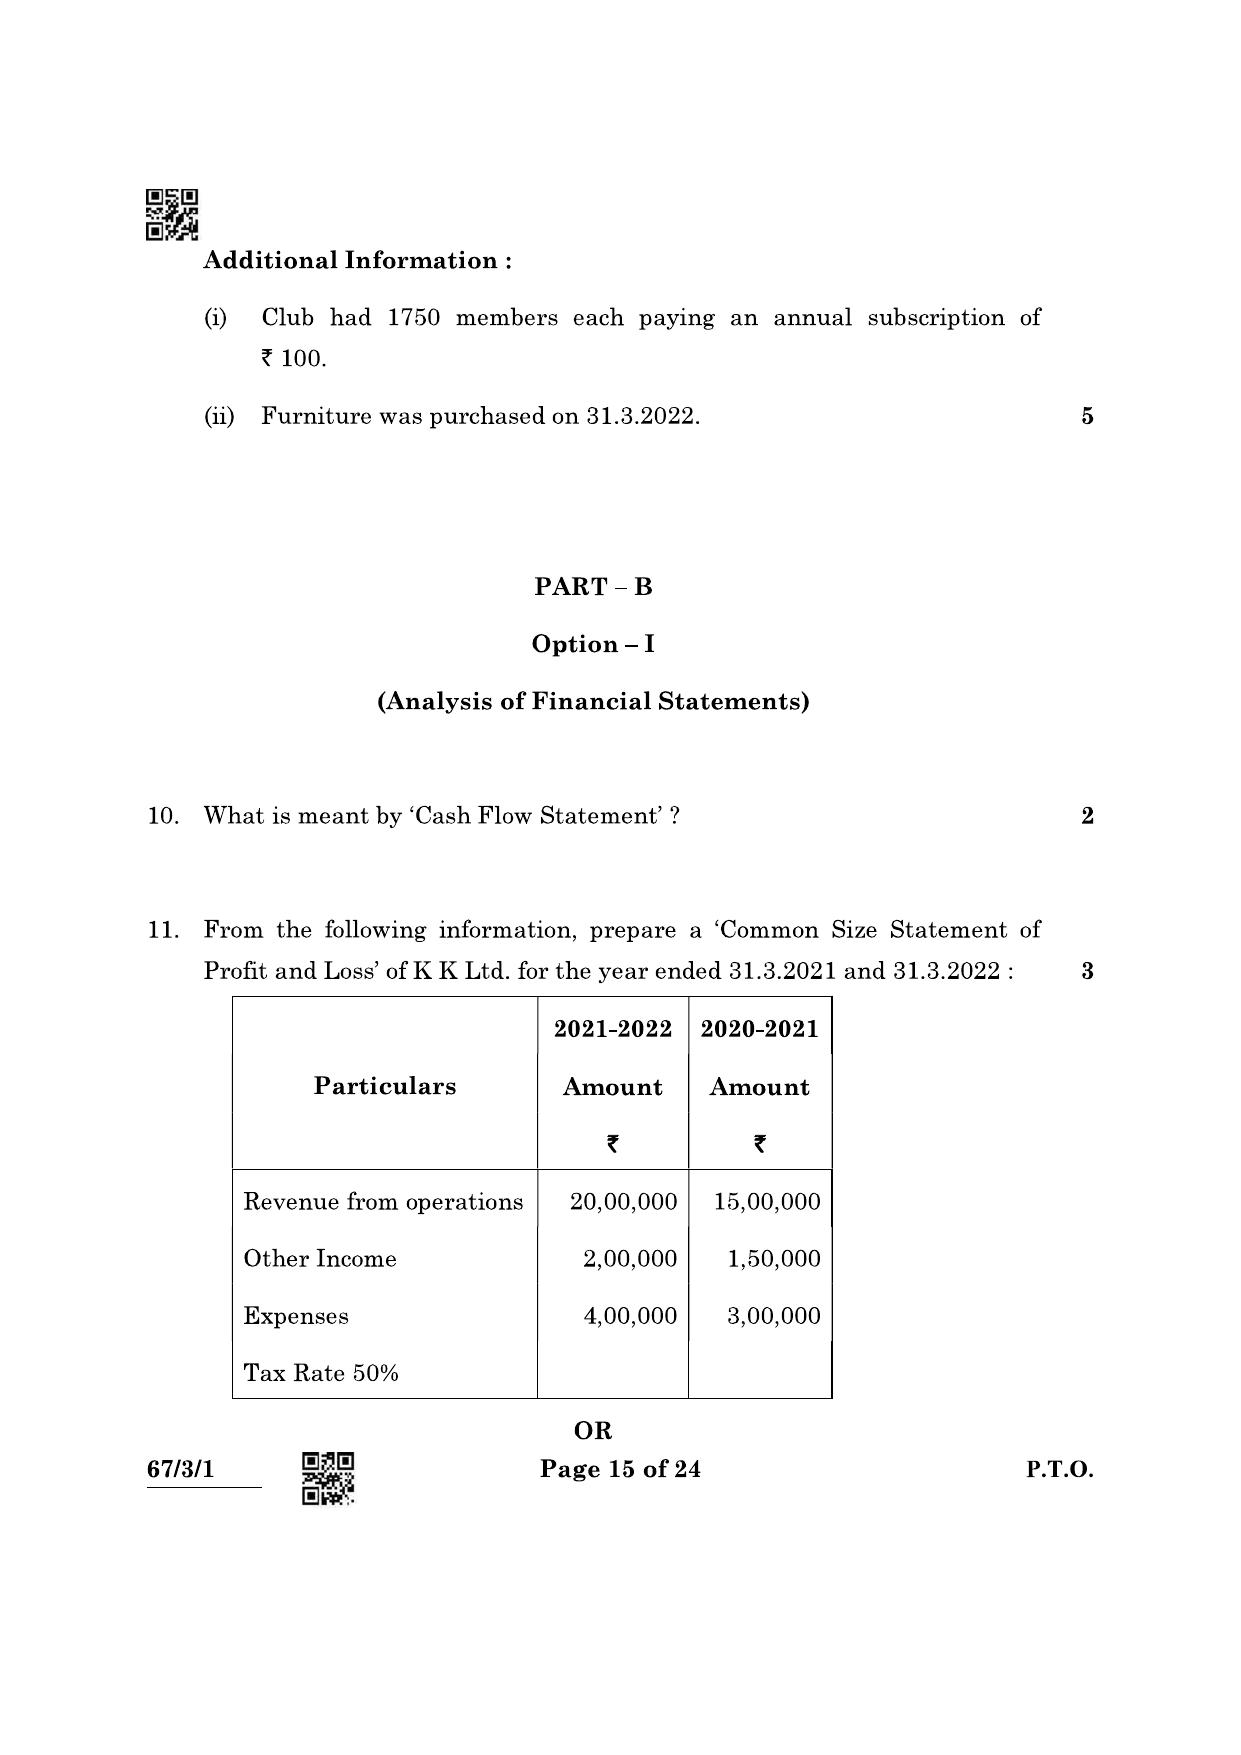 CBSE Class 12 67-3-1 Accountancy 2022 Question Paper - Page 15